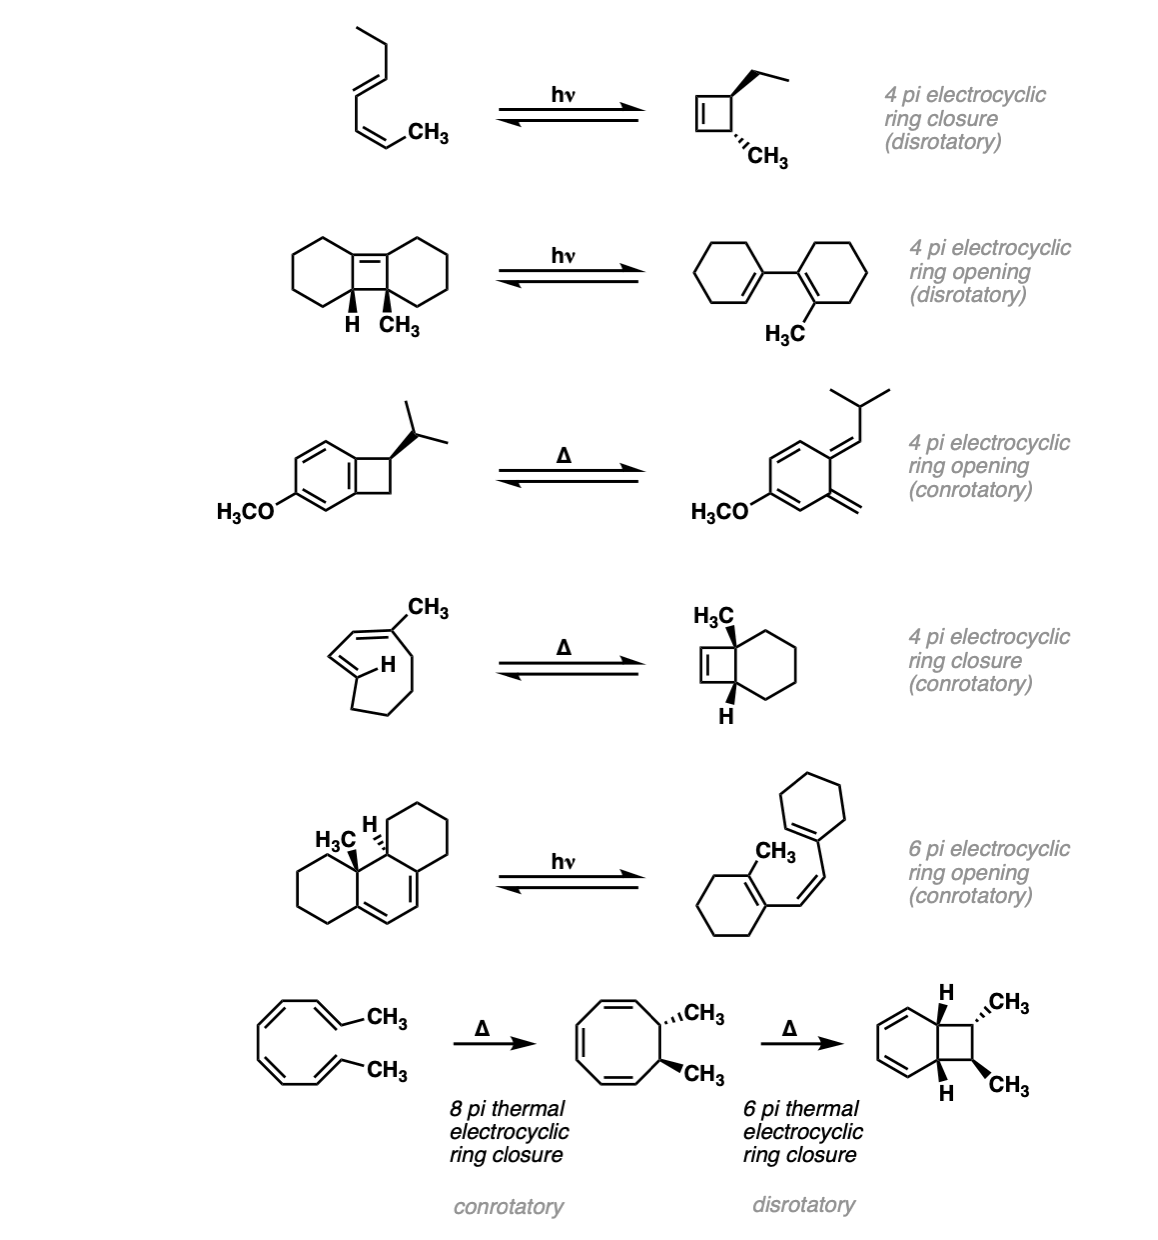 2-examples of electrocyclic ring opening and closure